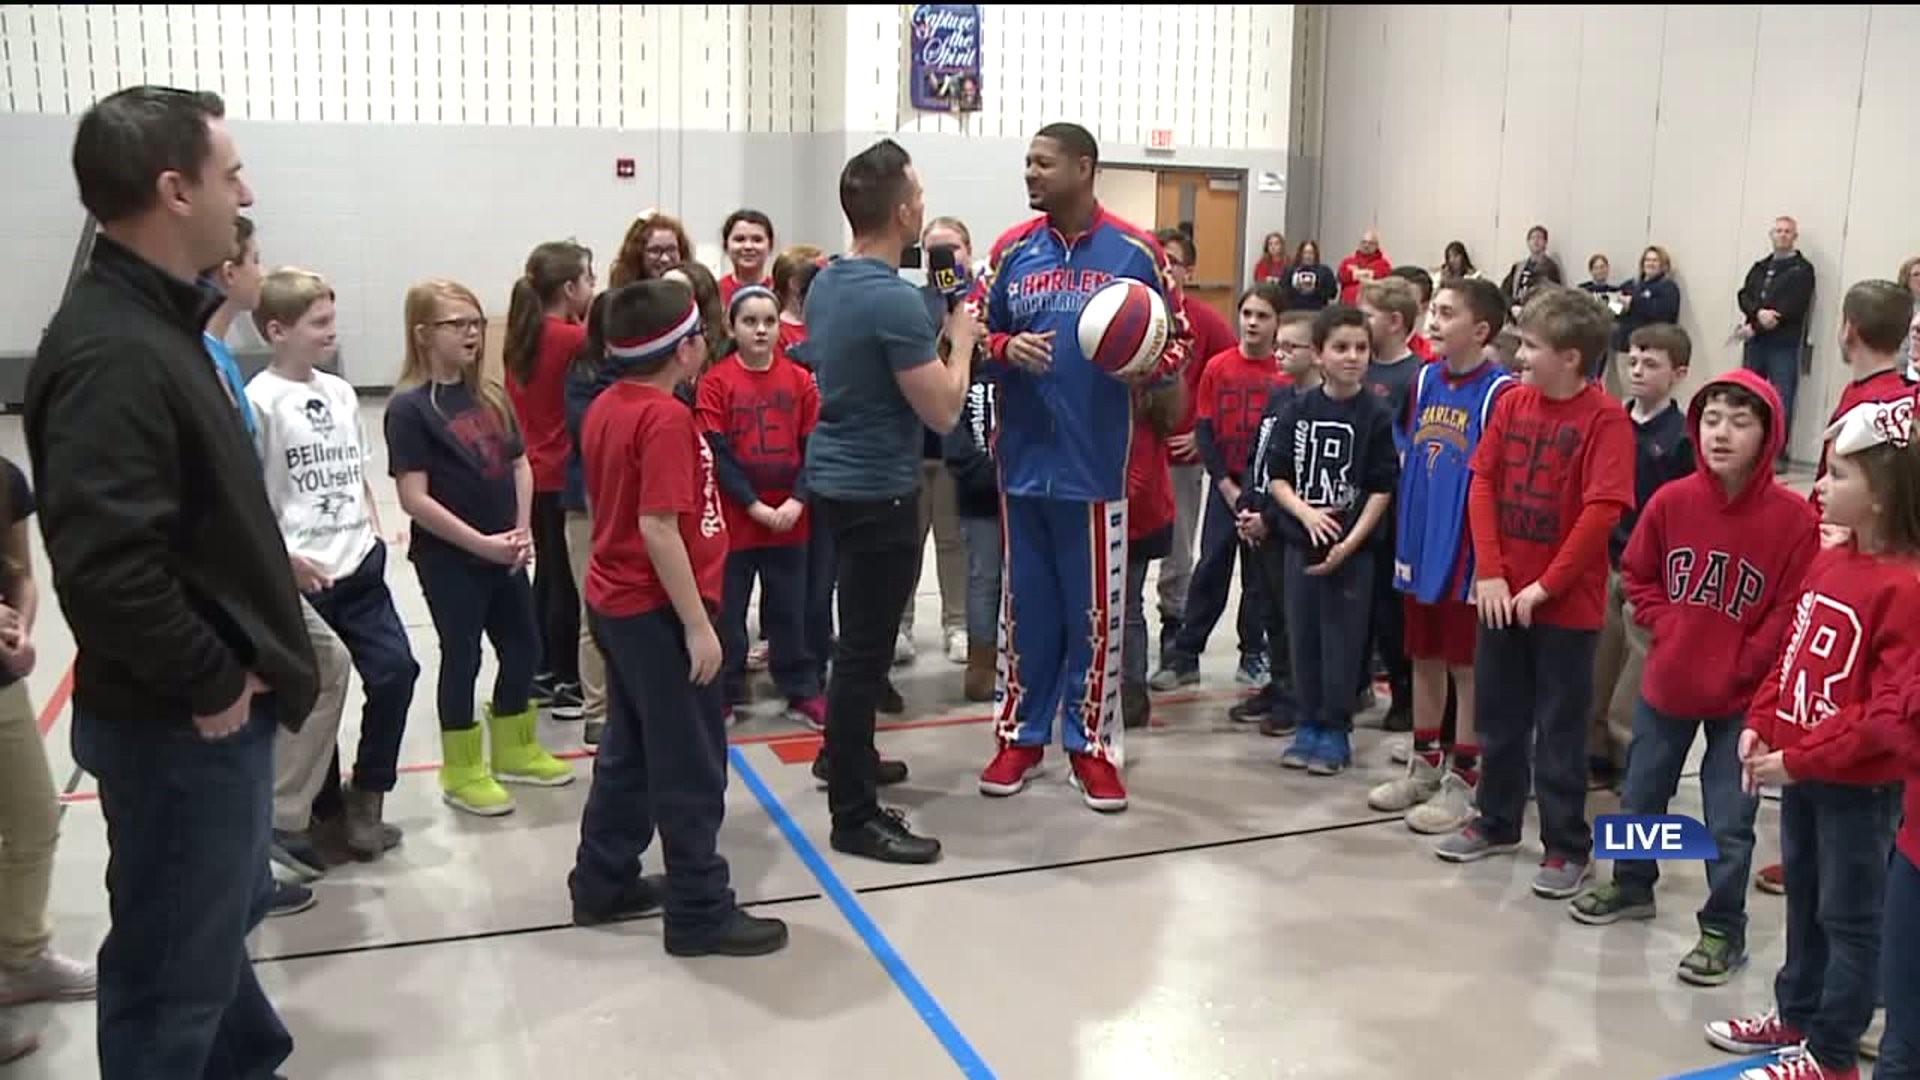 Ryan Leckey Makes Half-Court Shot to Send Kids to See Harlem Globetrotters.